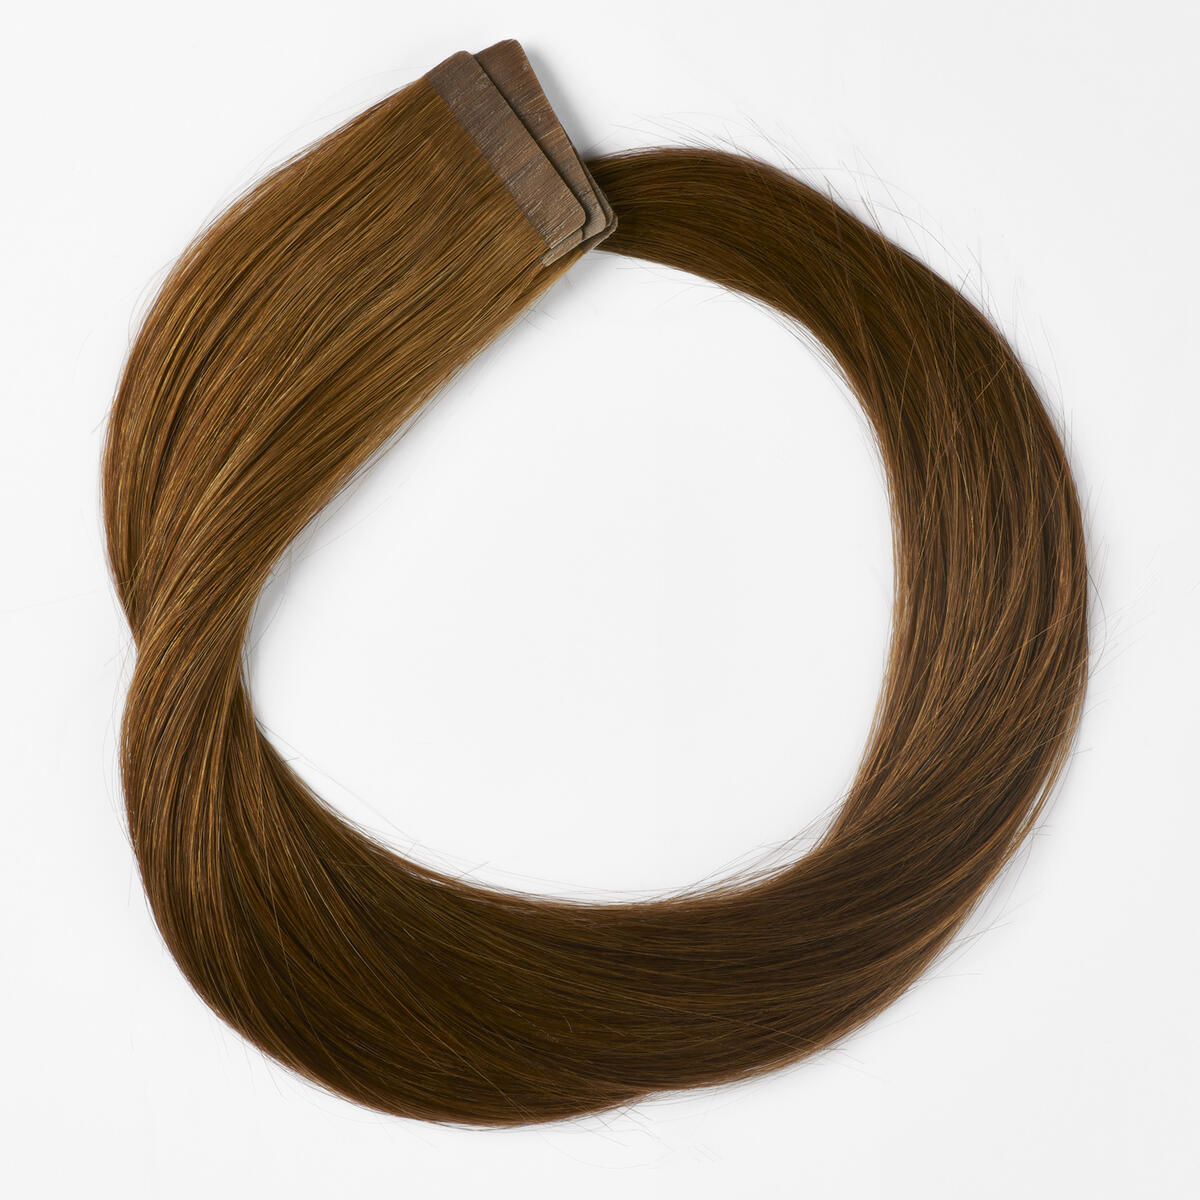 Basic Tape Extensions Classic 4 5.4 Copper Brown 40 cm